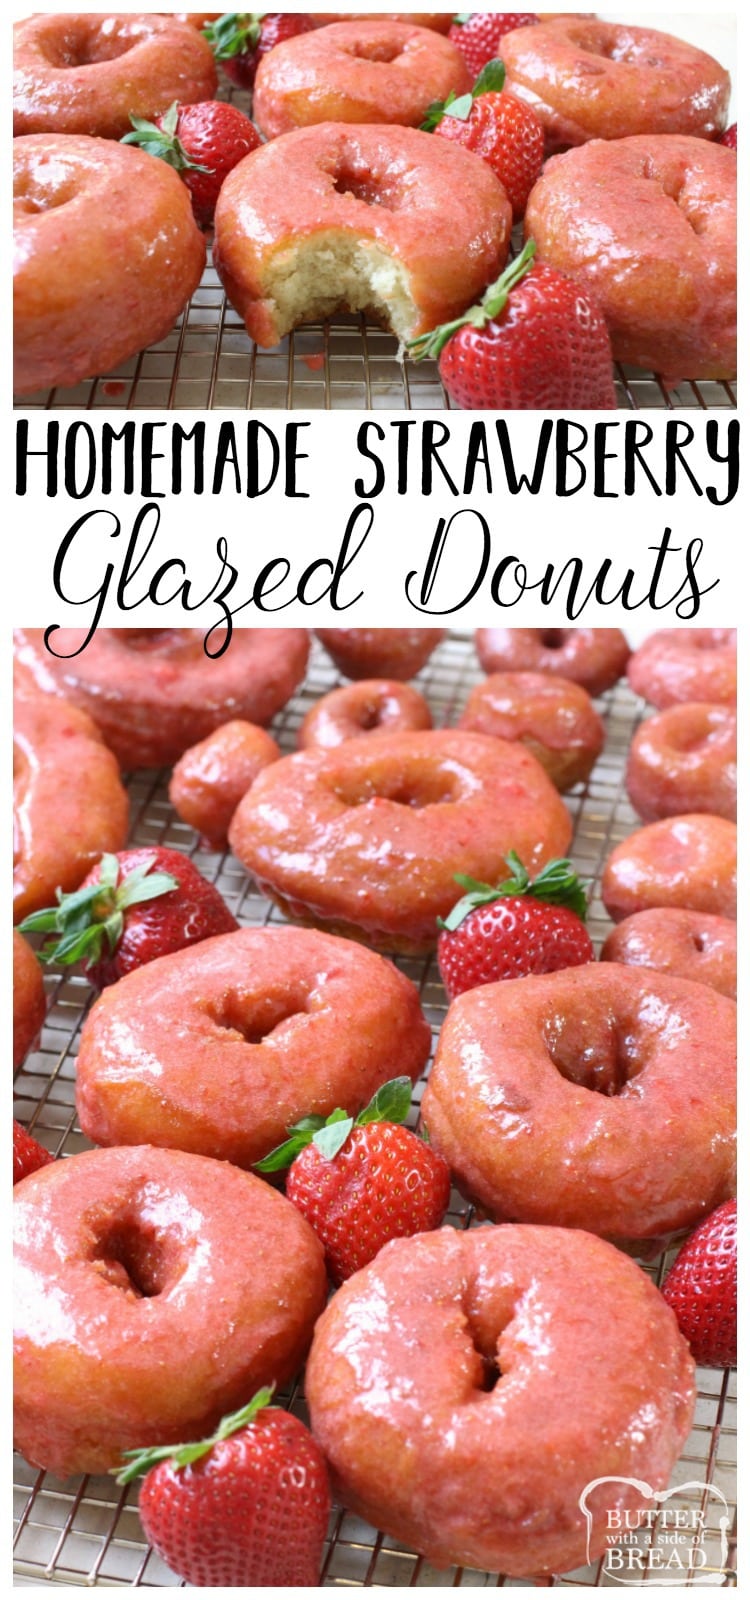 Incredible recipe for homemade Strawberry Glazed Donuts! Done, start to finish in about 30 minutes and OMG they taste SO good! The fresh strawberry glaze is amazing!